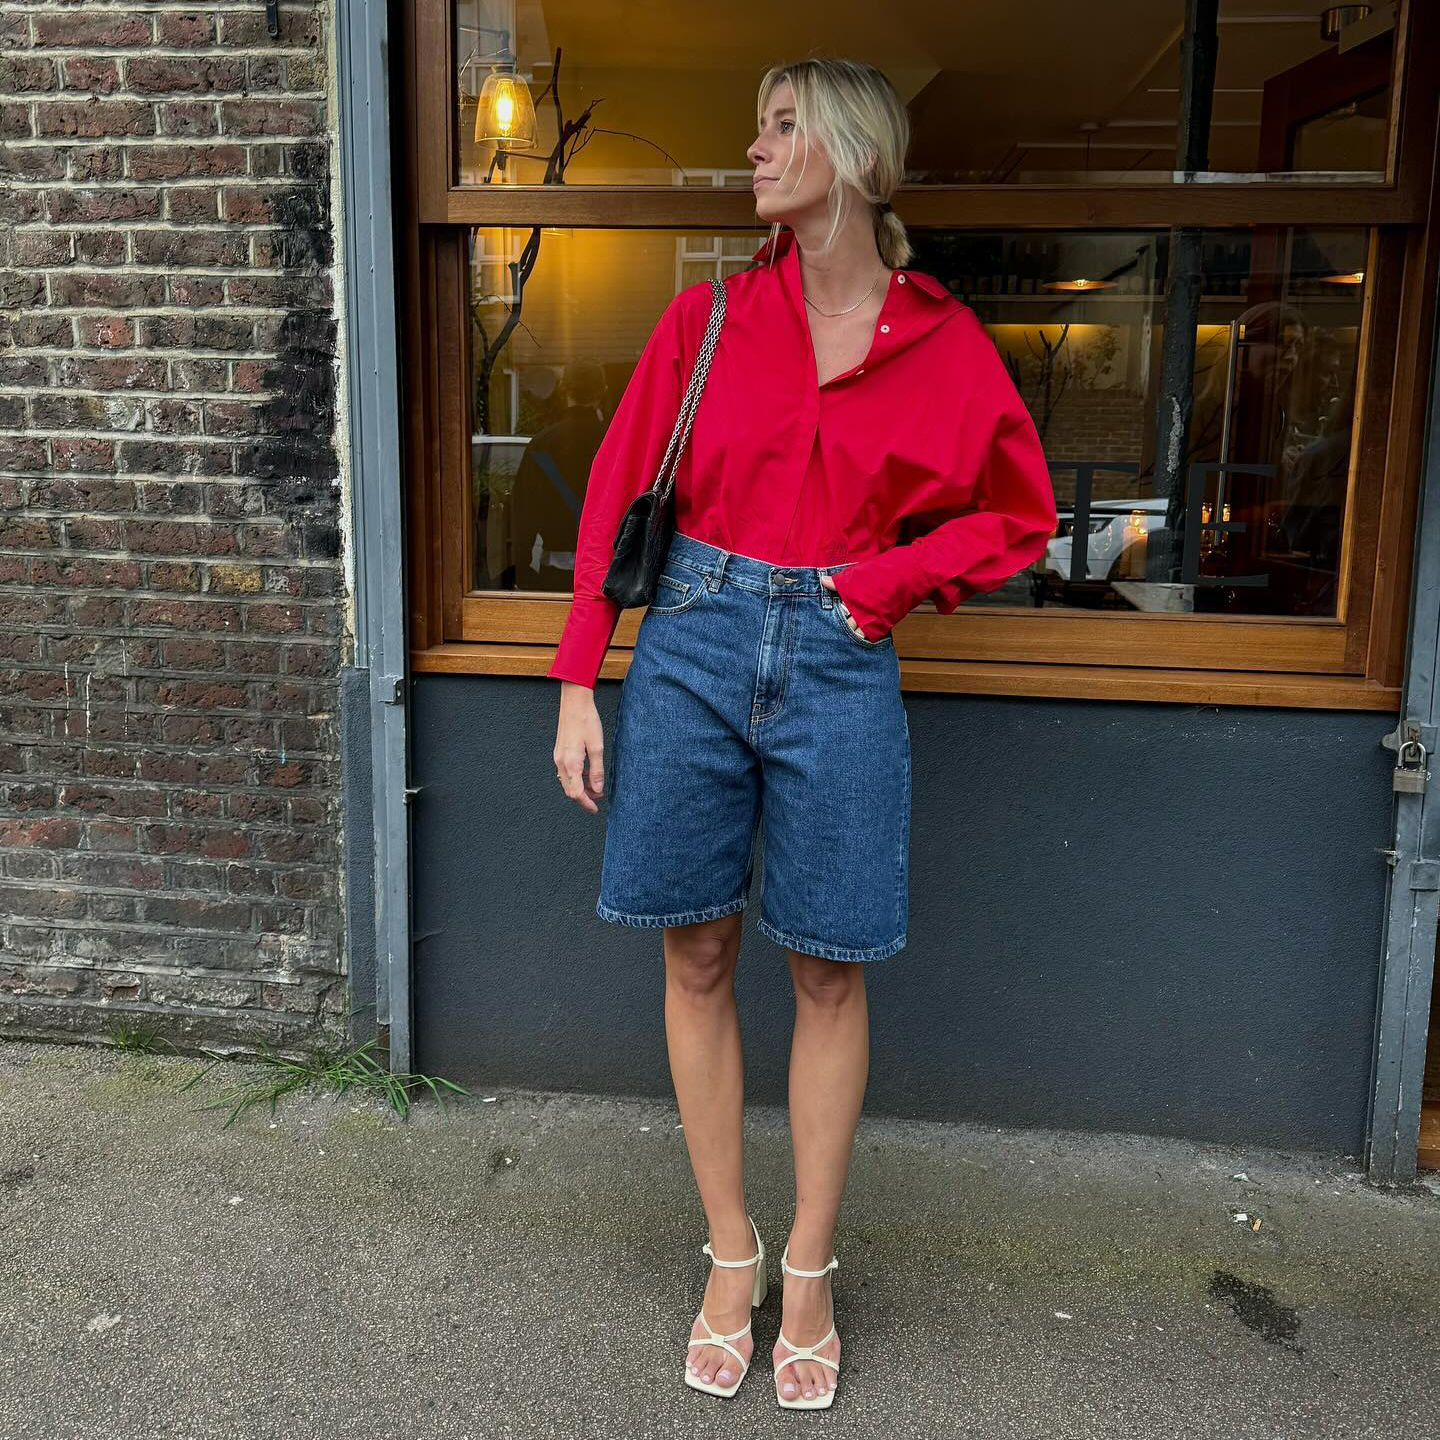 I've Worked It Out—These 8 Classic Top Styles Are the Key to Making Shorts Look Elegant This Summer